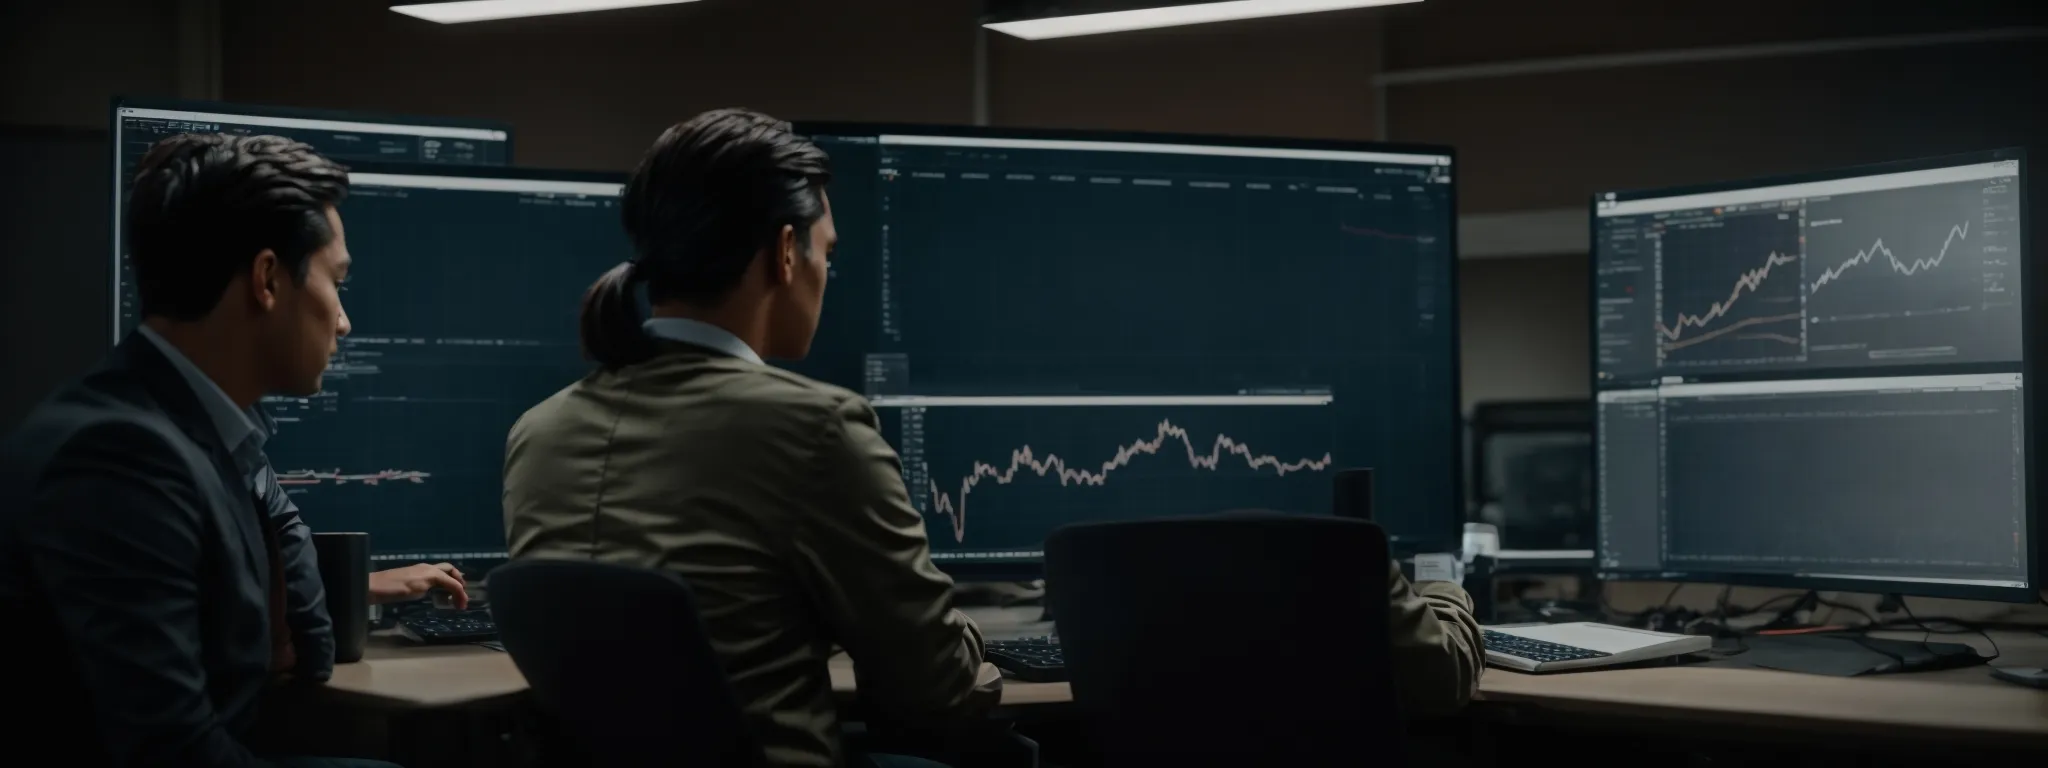 two professionals analyzing data graphs on a computer screen to optimize digital marketing strategies.